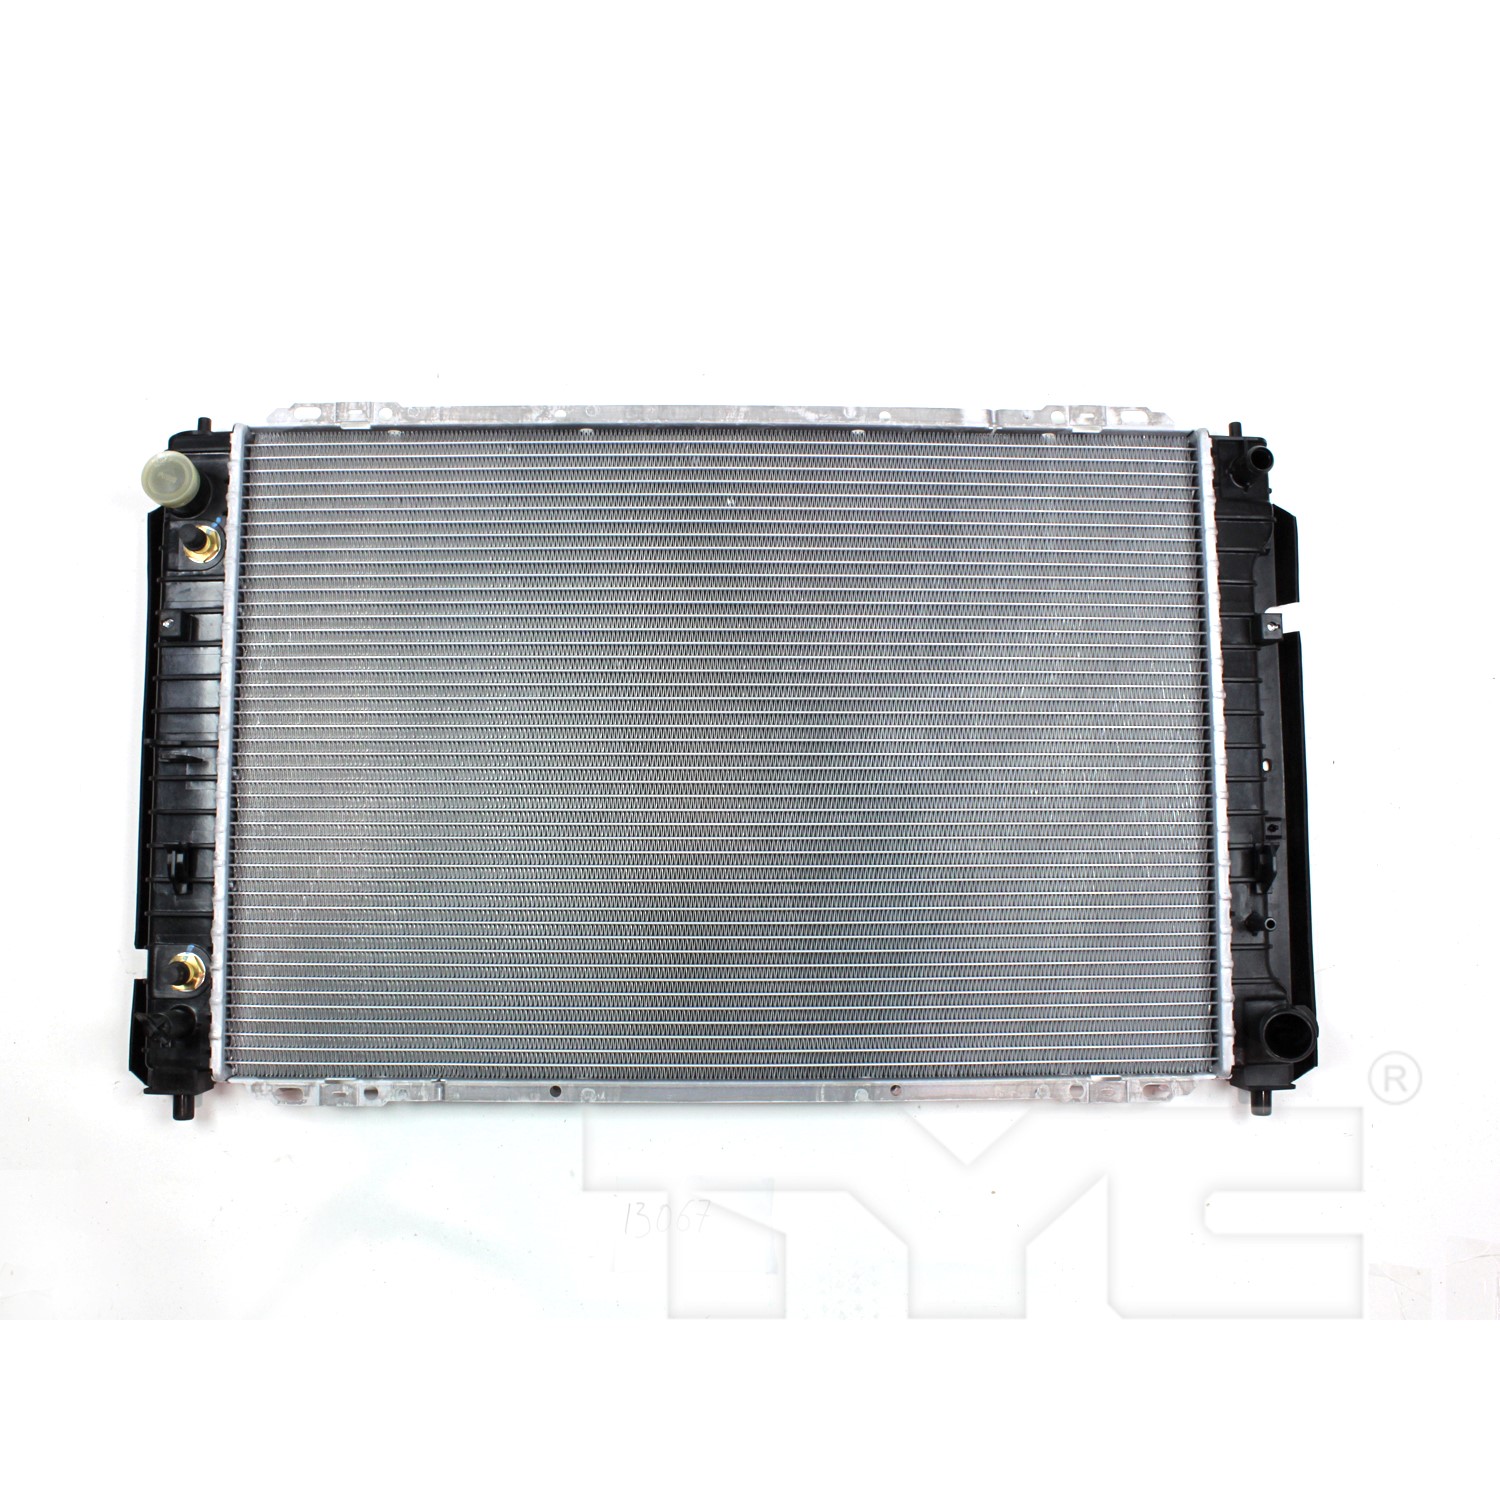 Aftermarket RADIATORS for FORD - ESCAPE, ESCAPE,05-07,Radiator assembly